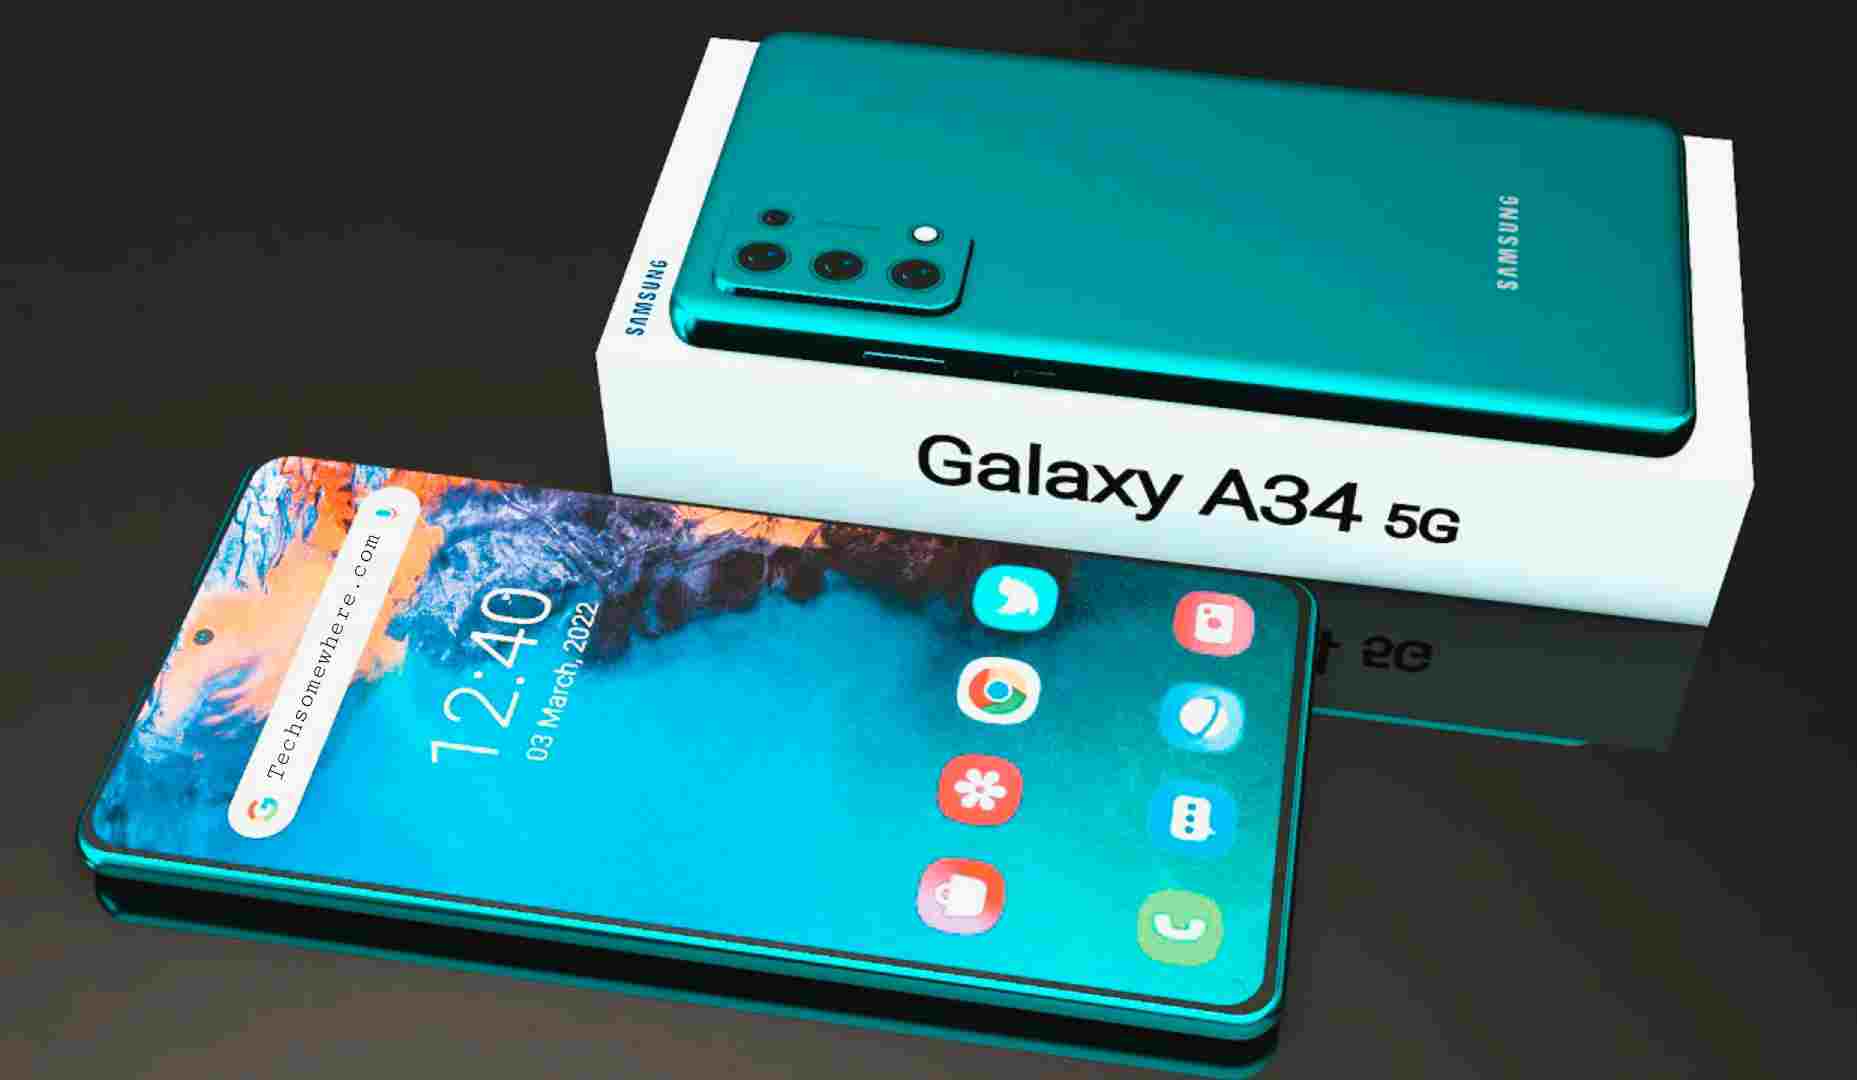 Samsung Galaxy A34 Price, Amazing Specification & Release Date!